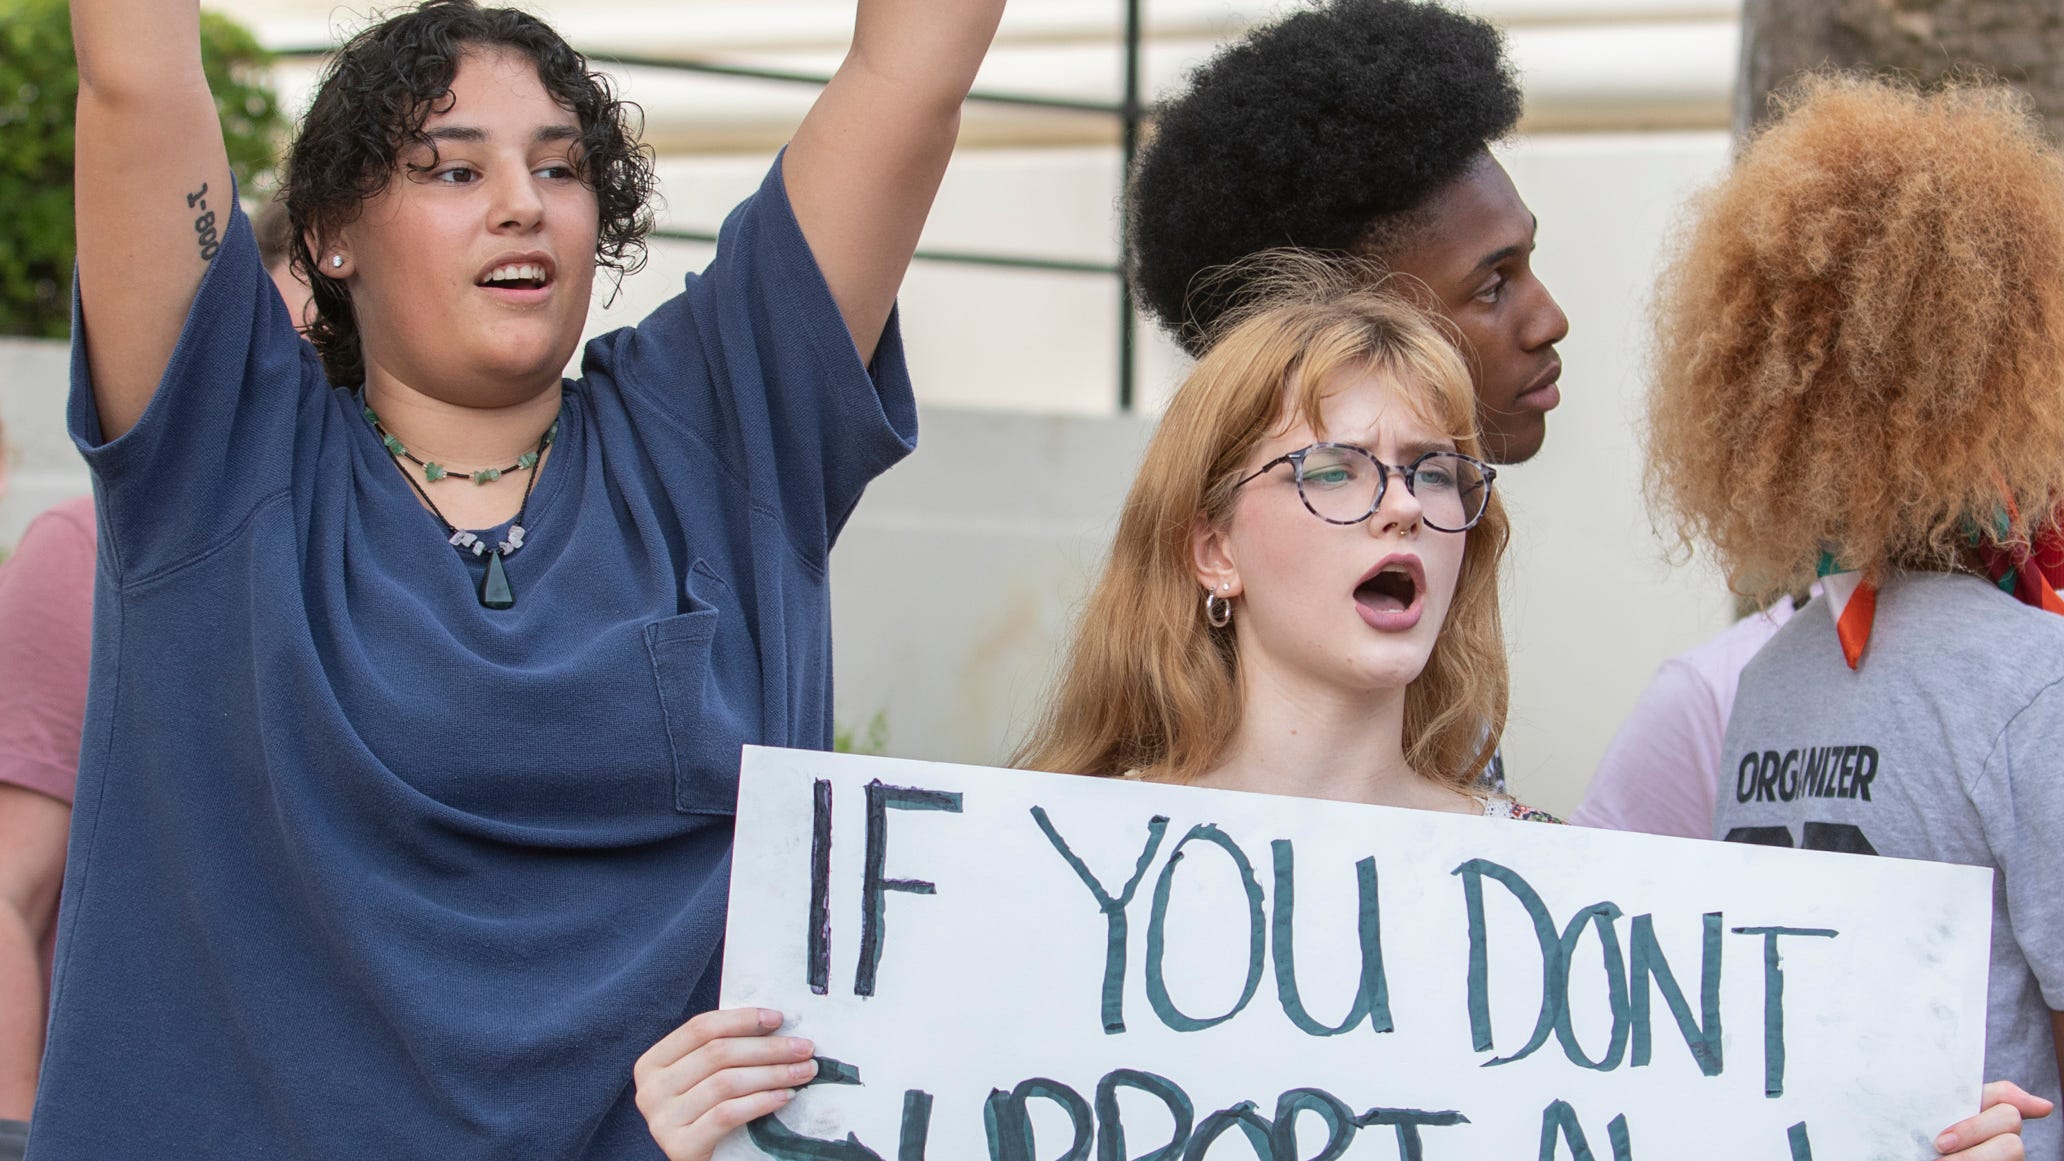 Florida 16 year old denied abortion shows legal limits advocates say